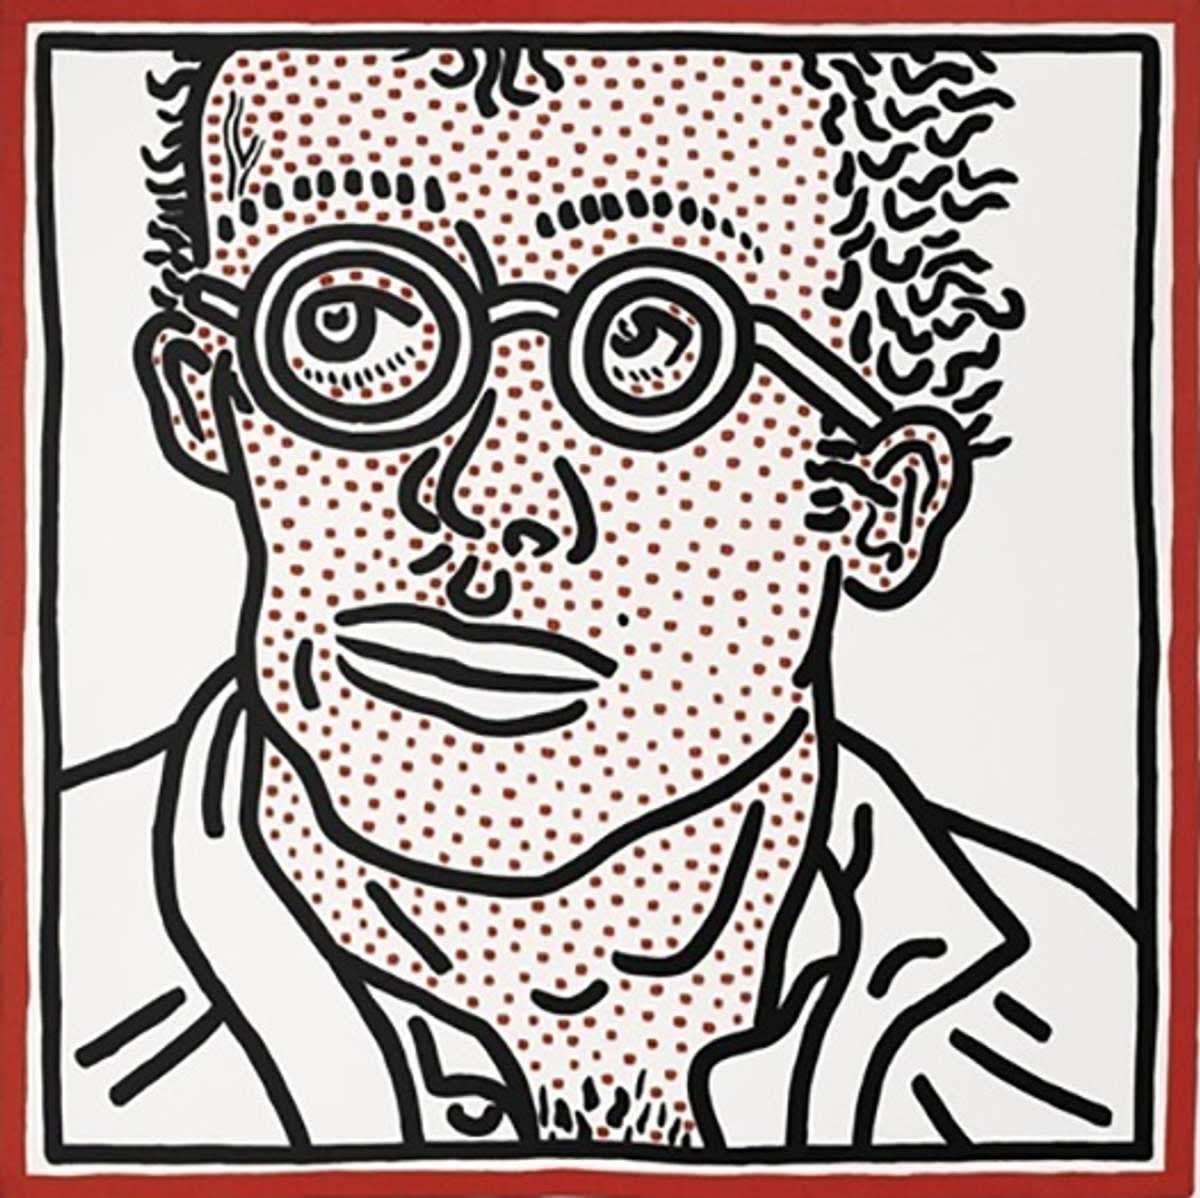 Self-Portrait For Tony, Keith Haring